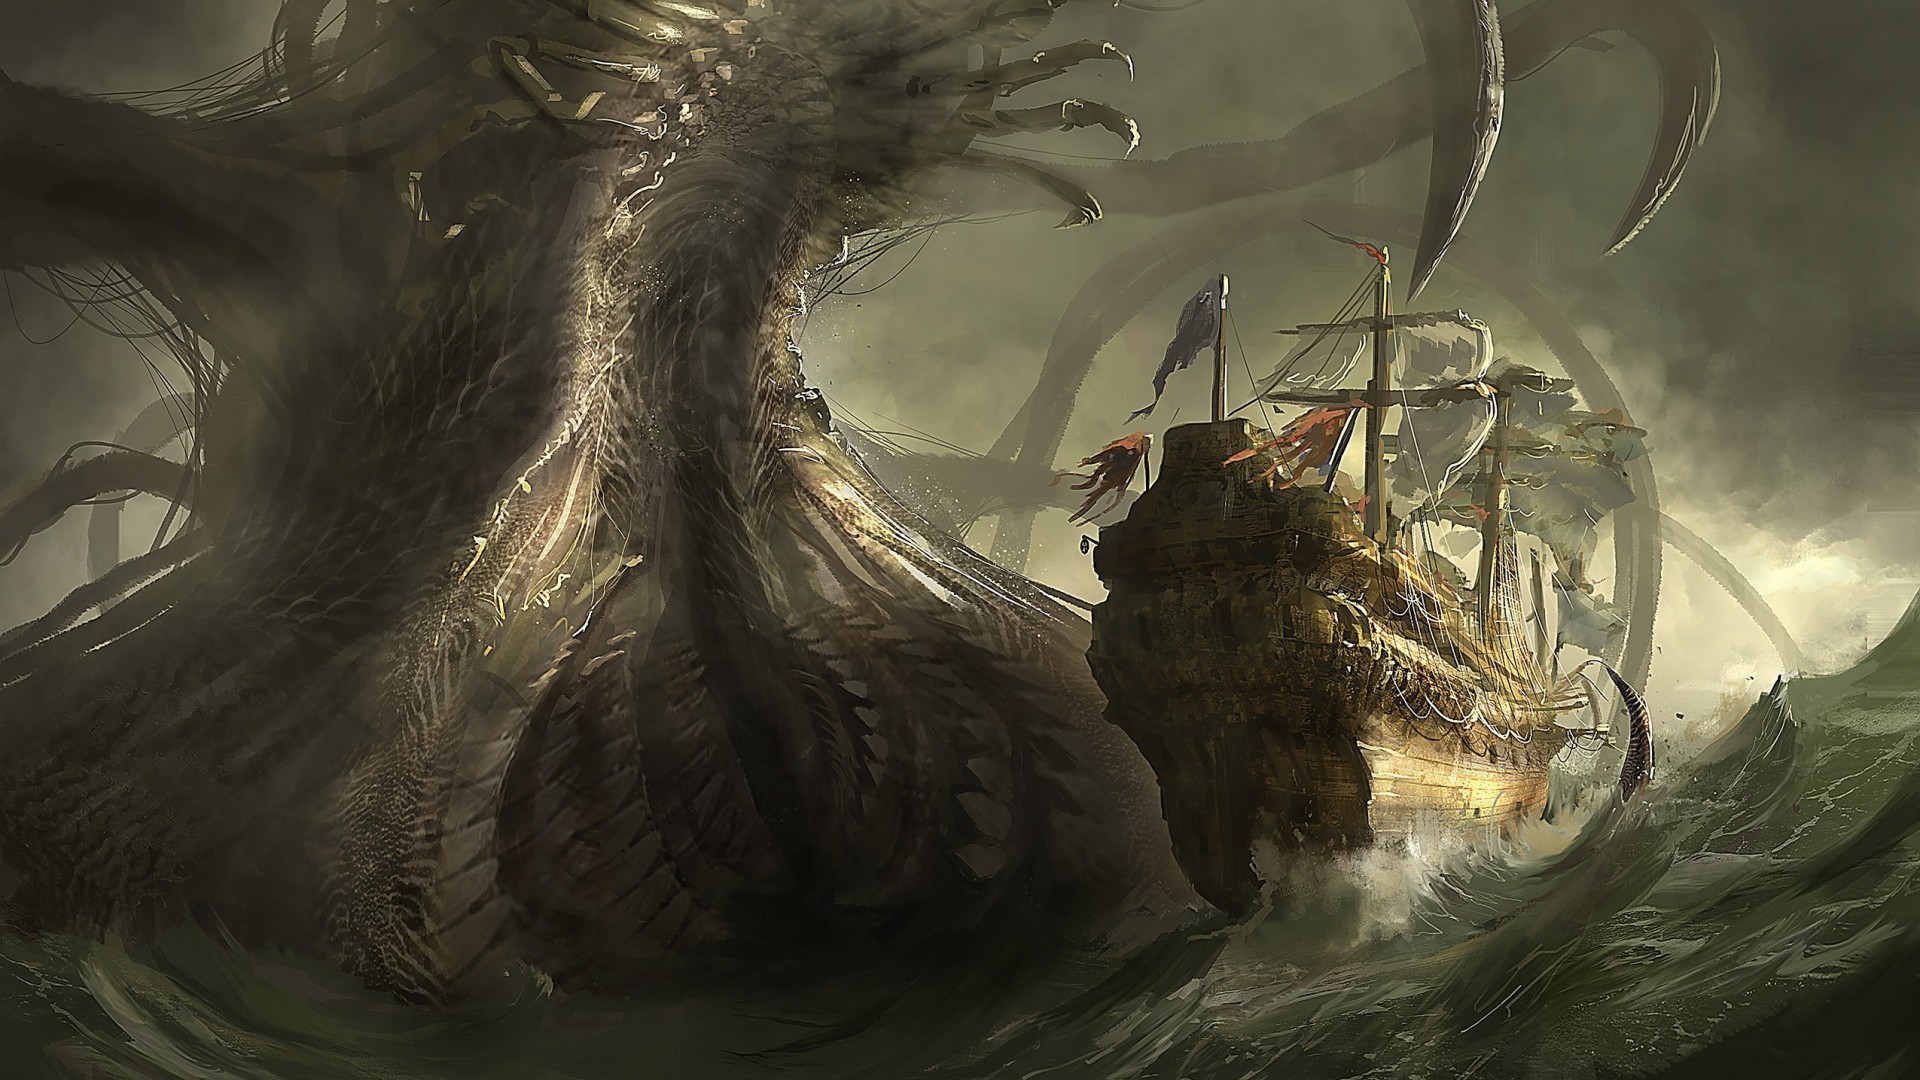 1920x1080 open mouth, Fantasy art, Digital art, Pixelated, Artwork, Science fiction,  Kraken, Creature, Sea, Pirates of the Caribbean: The Curse of the Black  Pearl, ...